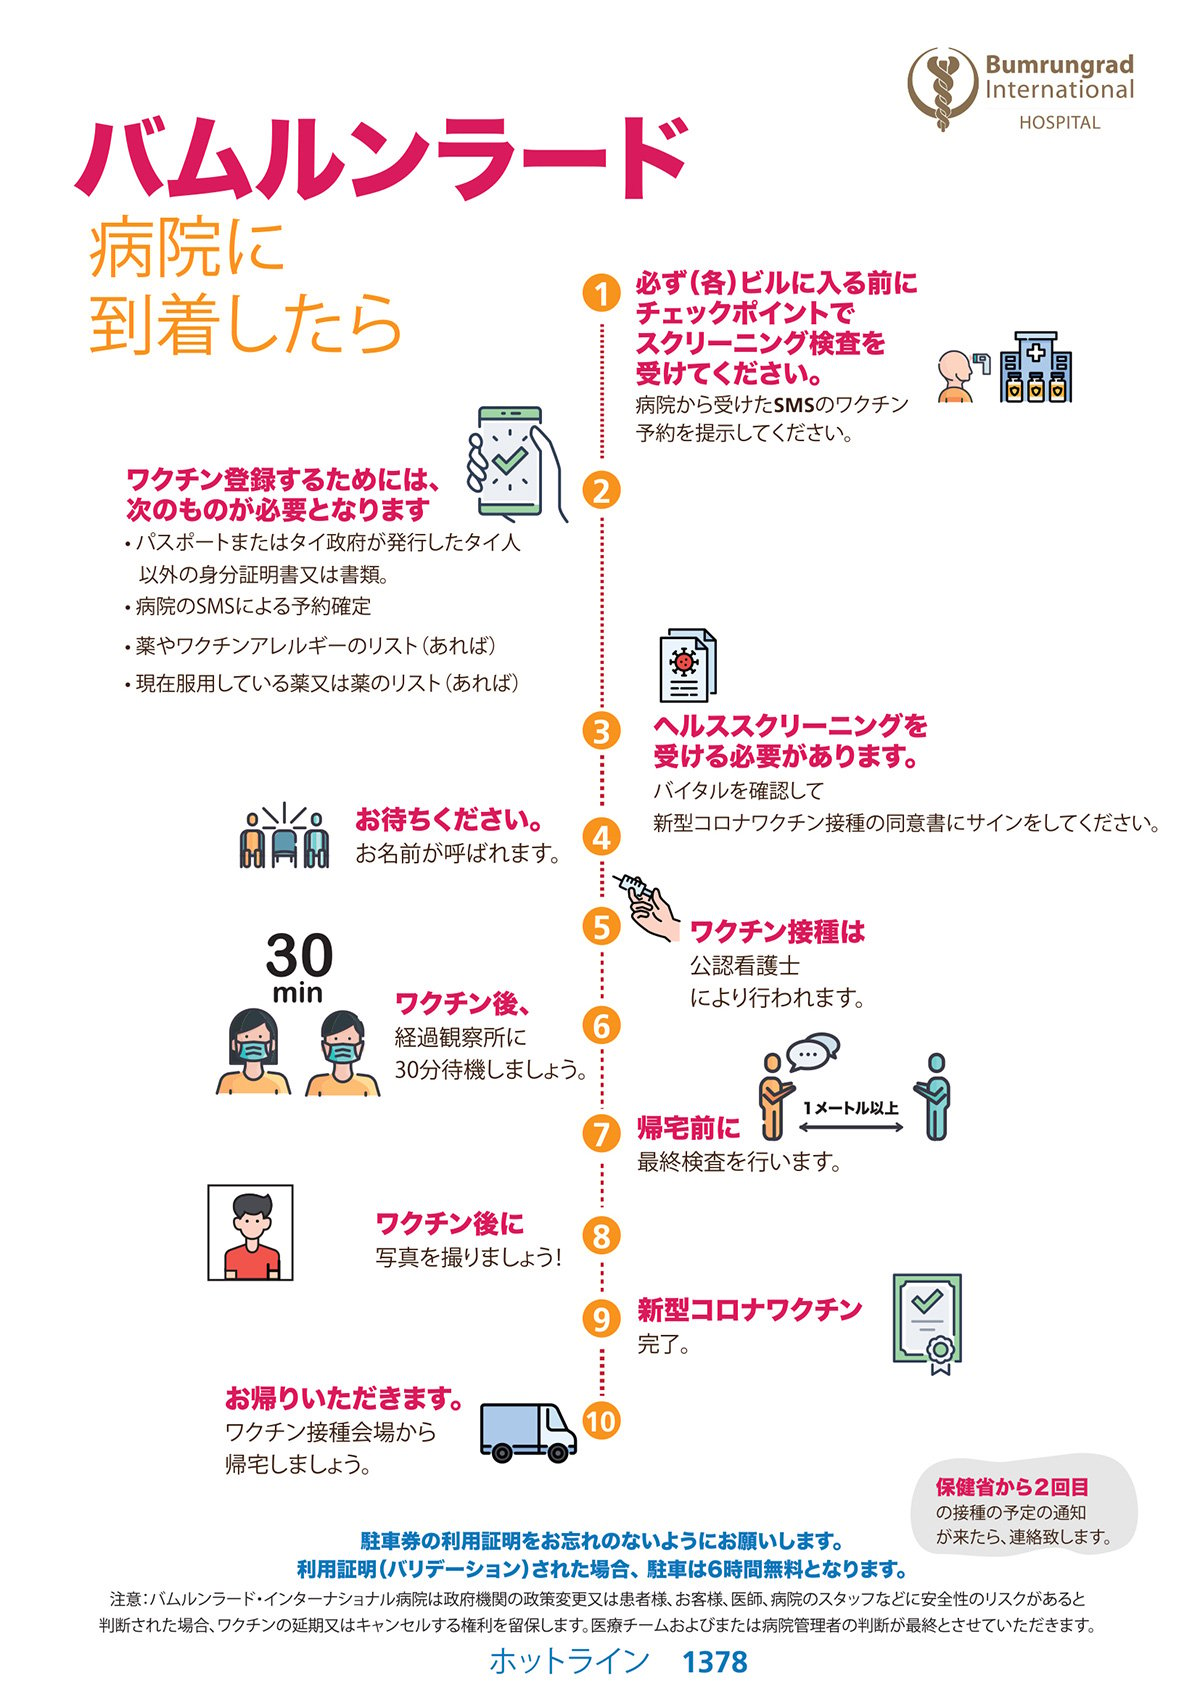 Getting-Your-Covid-19-Vaccination-info_JP-03-(1).jpg